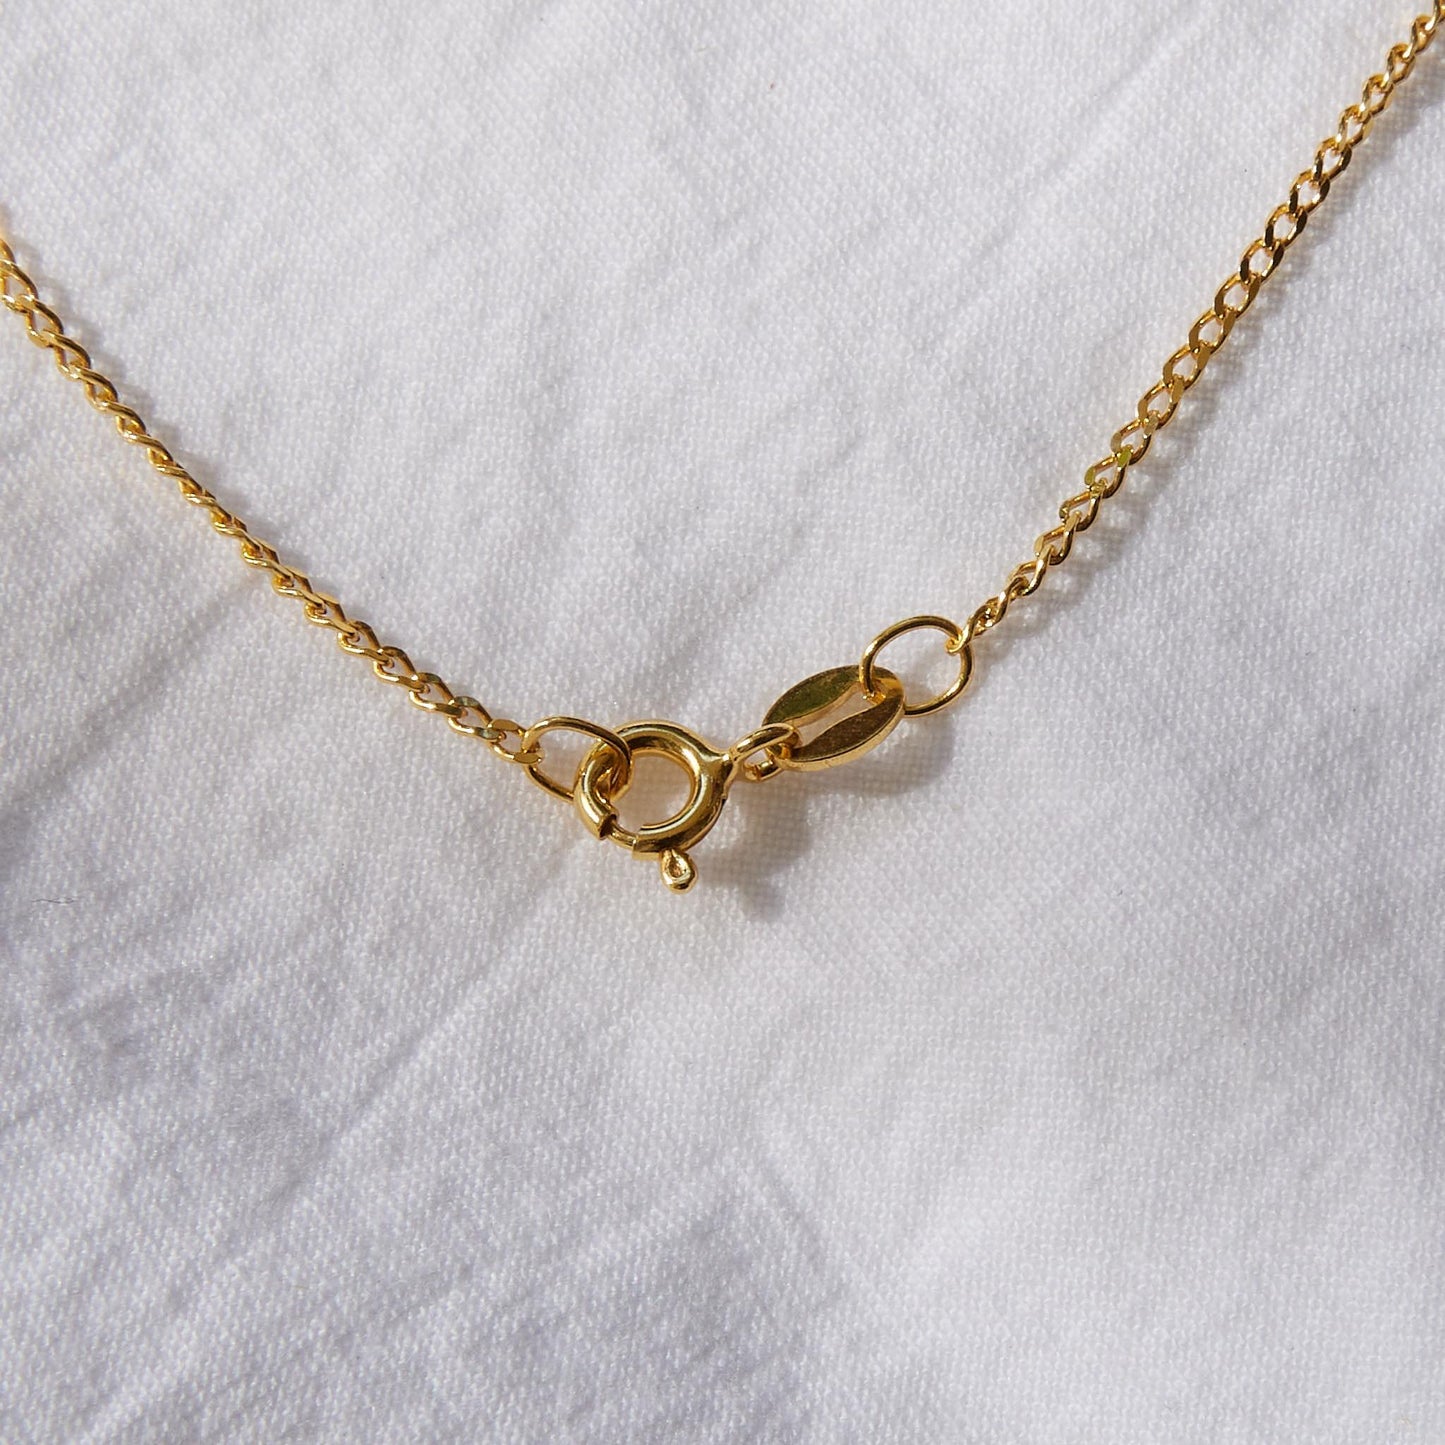 Starfish 24k Gold plated Necklace